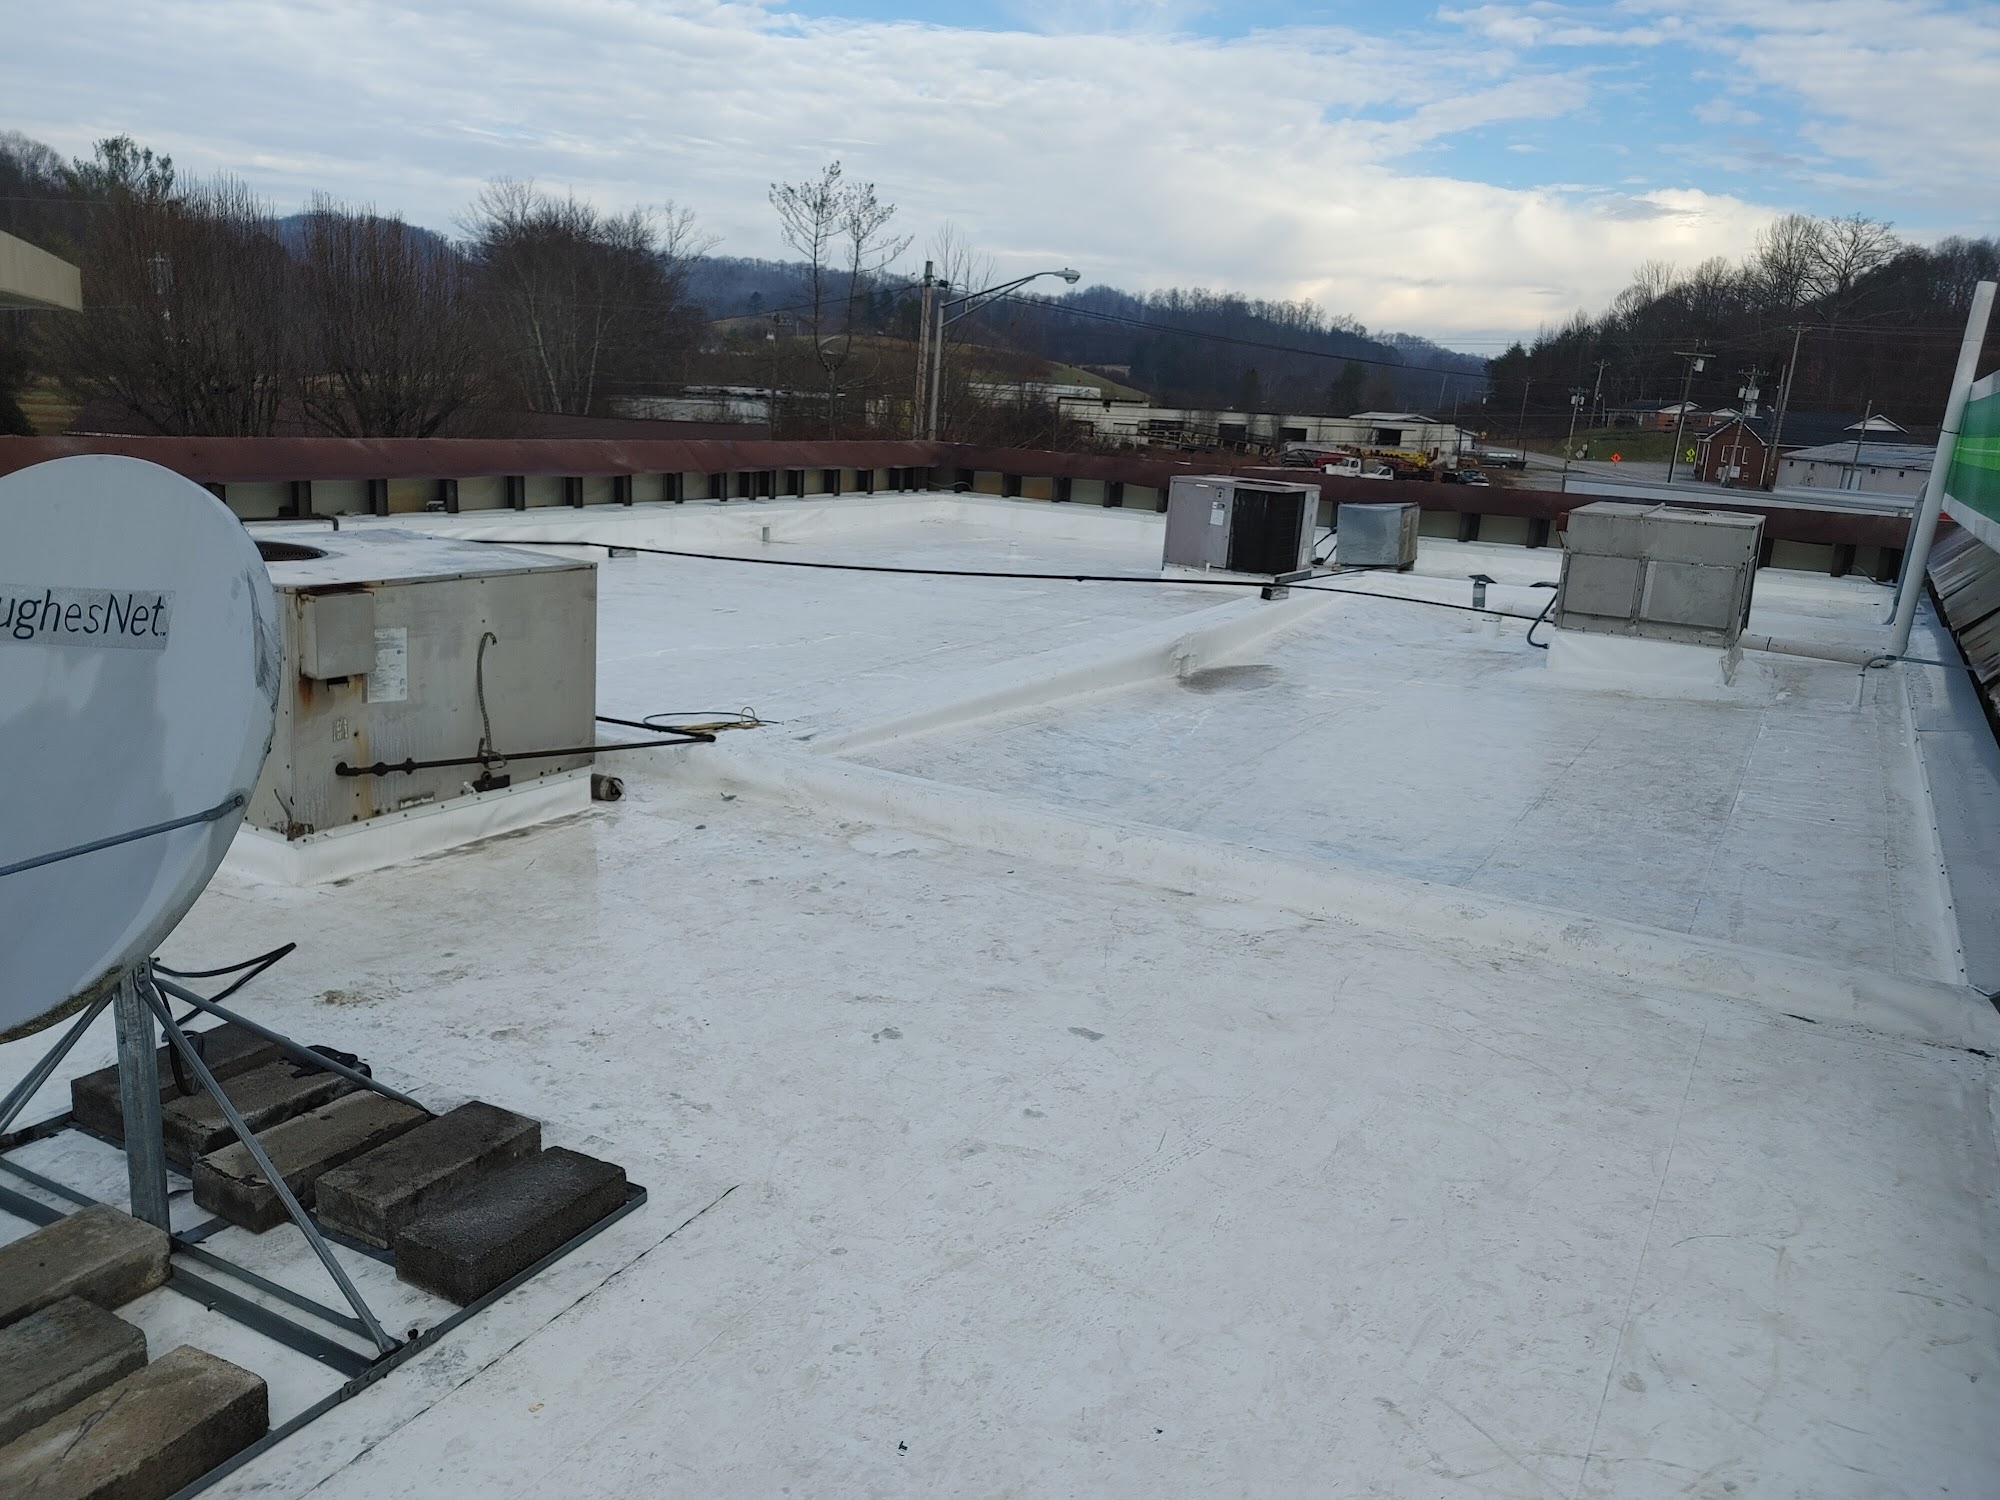 William Maxwell Roofing 111 N Indiana Ave, LaFollette Tennessee 37766